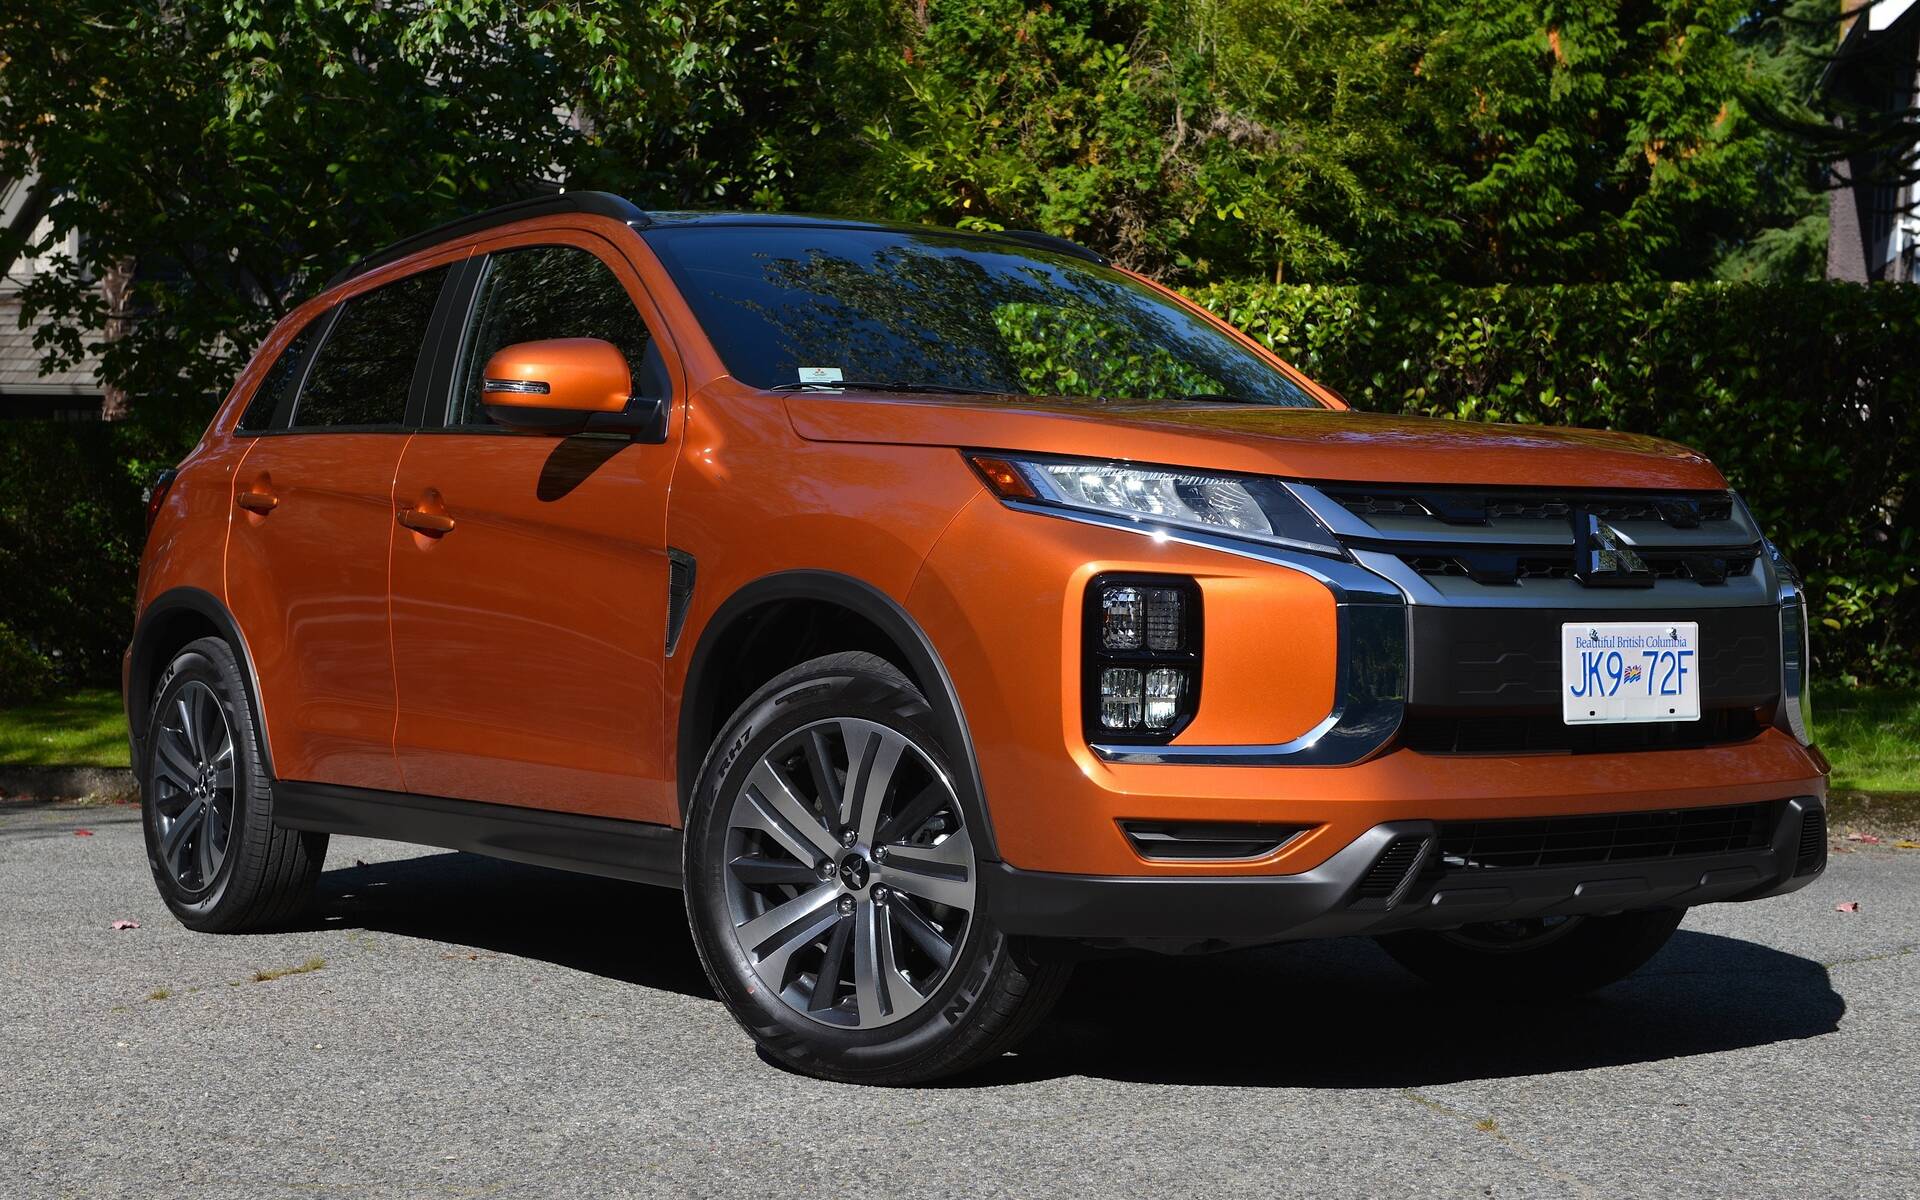 Top 10 Most Affordable SUVs and Crossovers in 2021 4/11